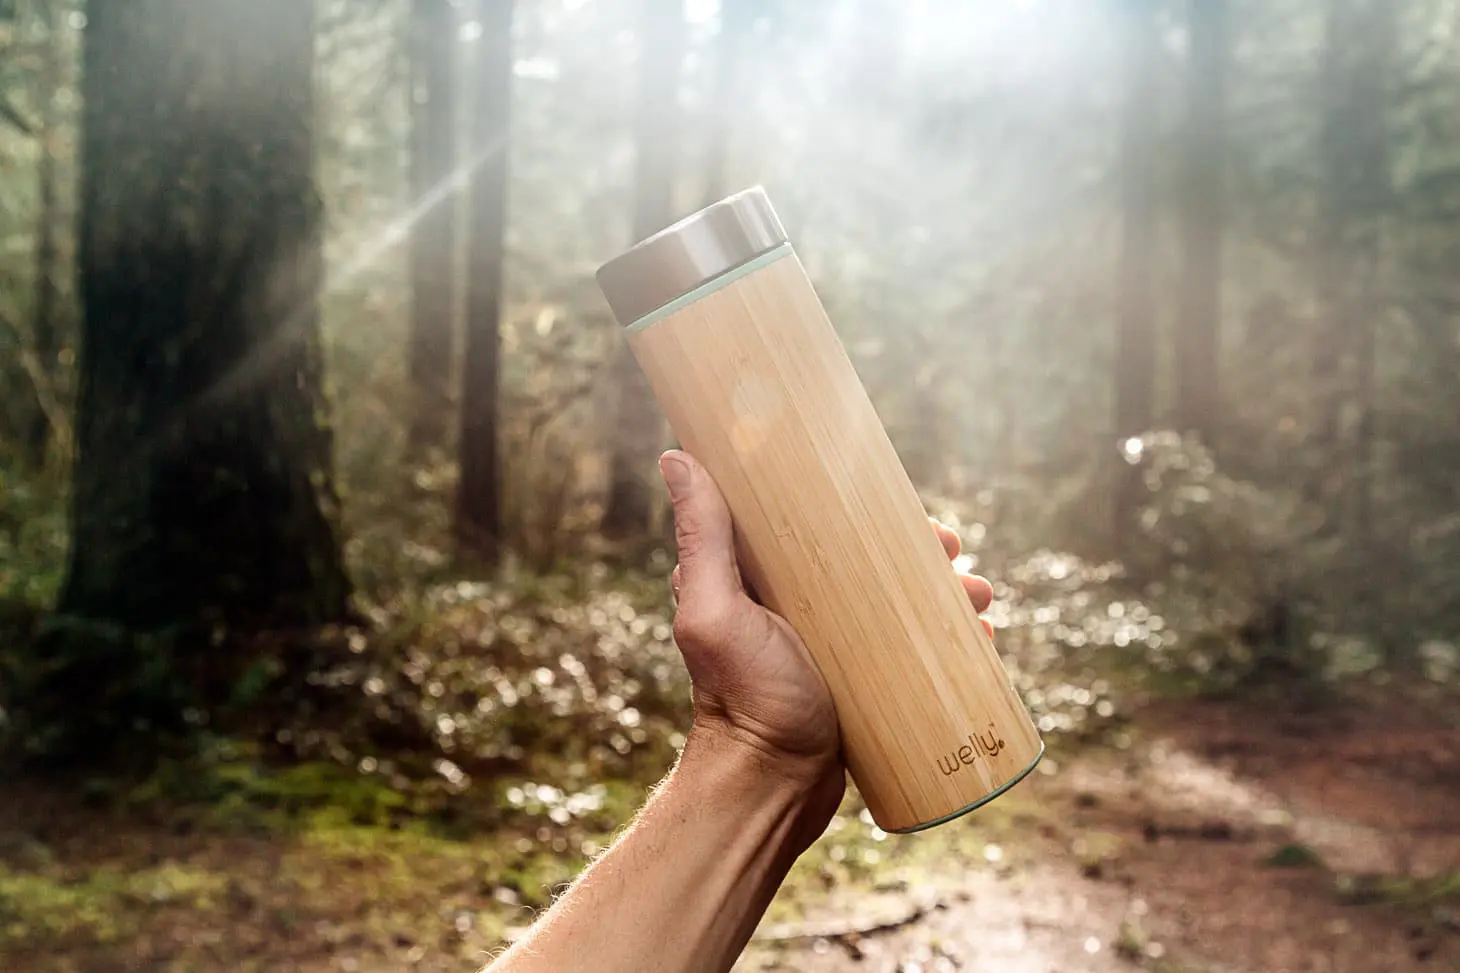 Holding the Welly infuser water bottle